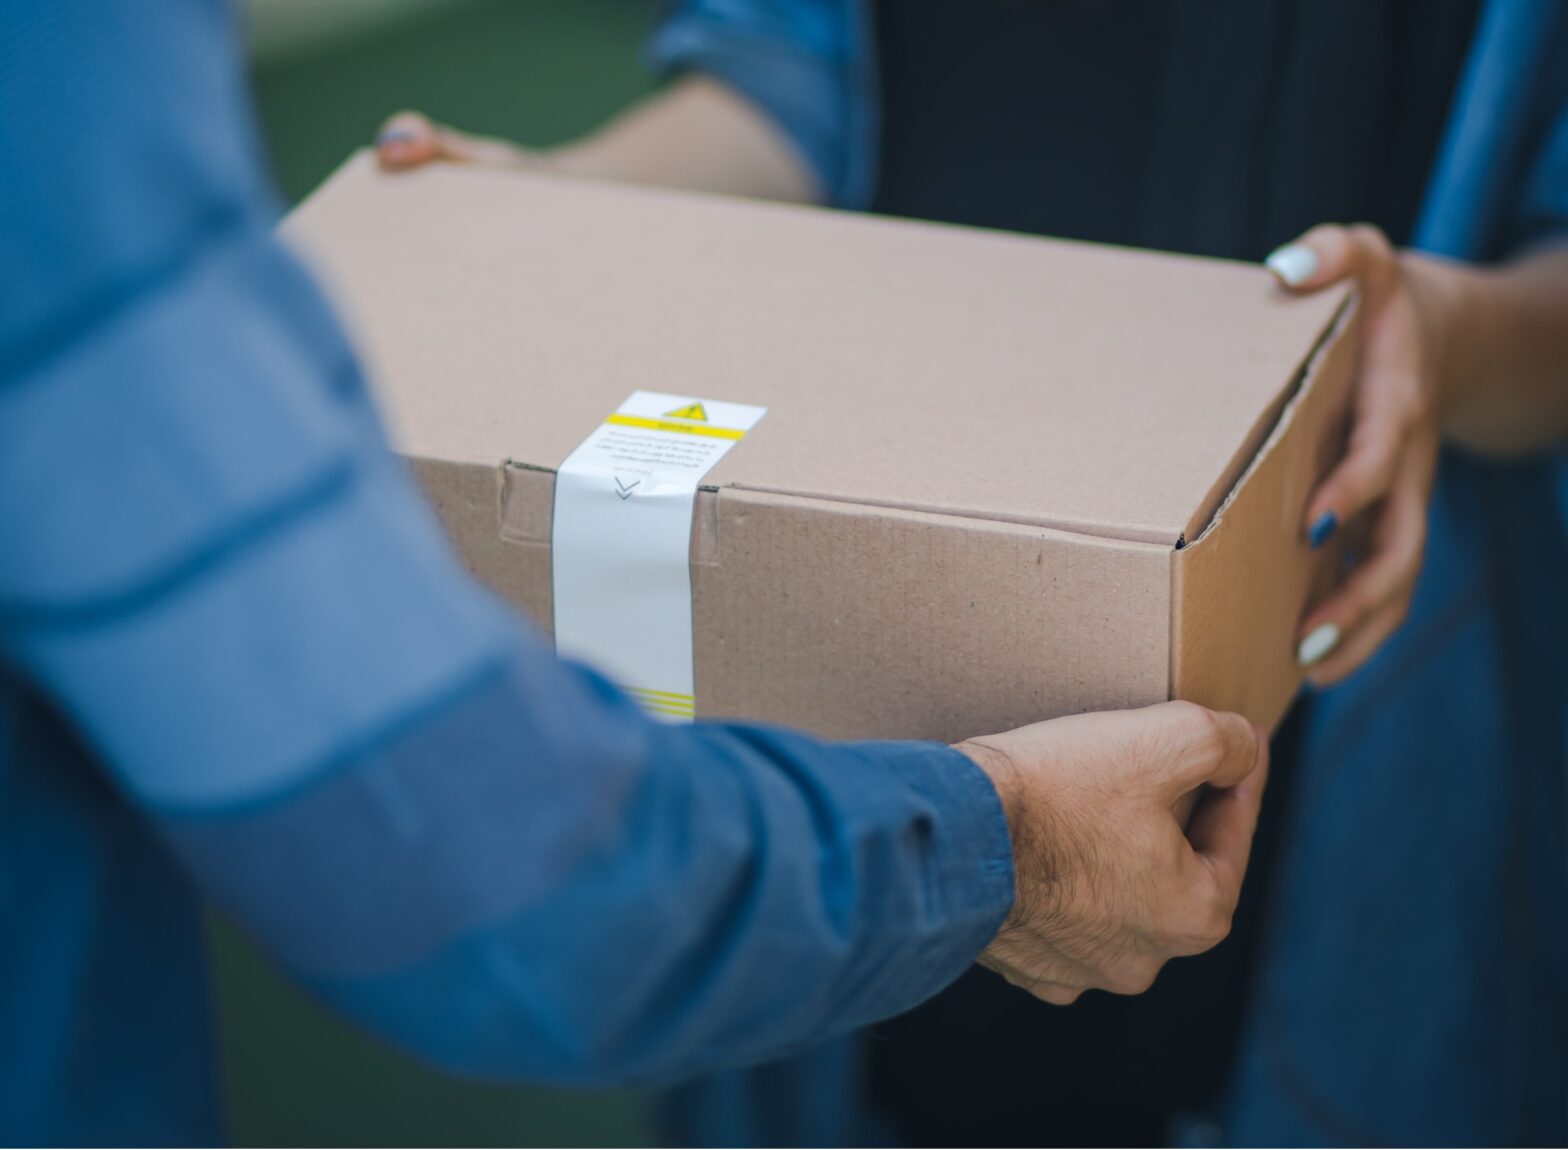 A man handing a box or mailed package to a woman.